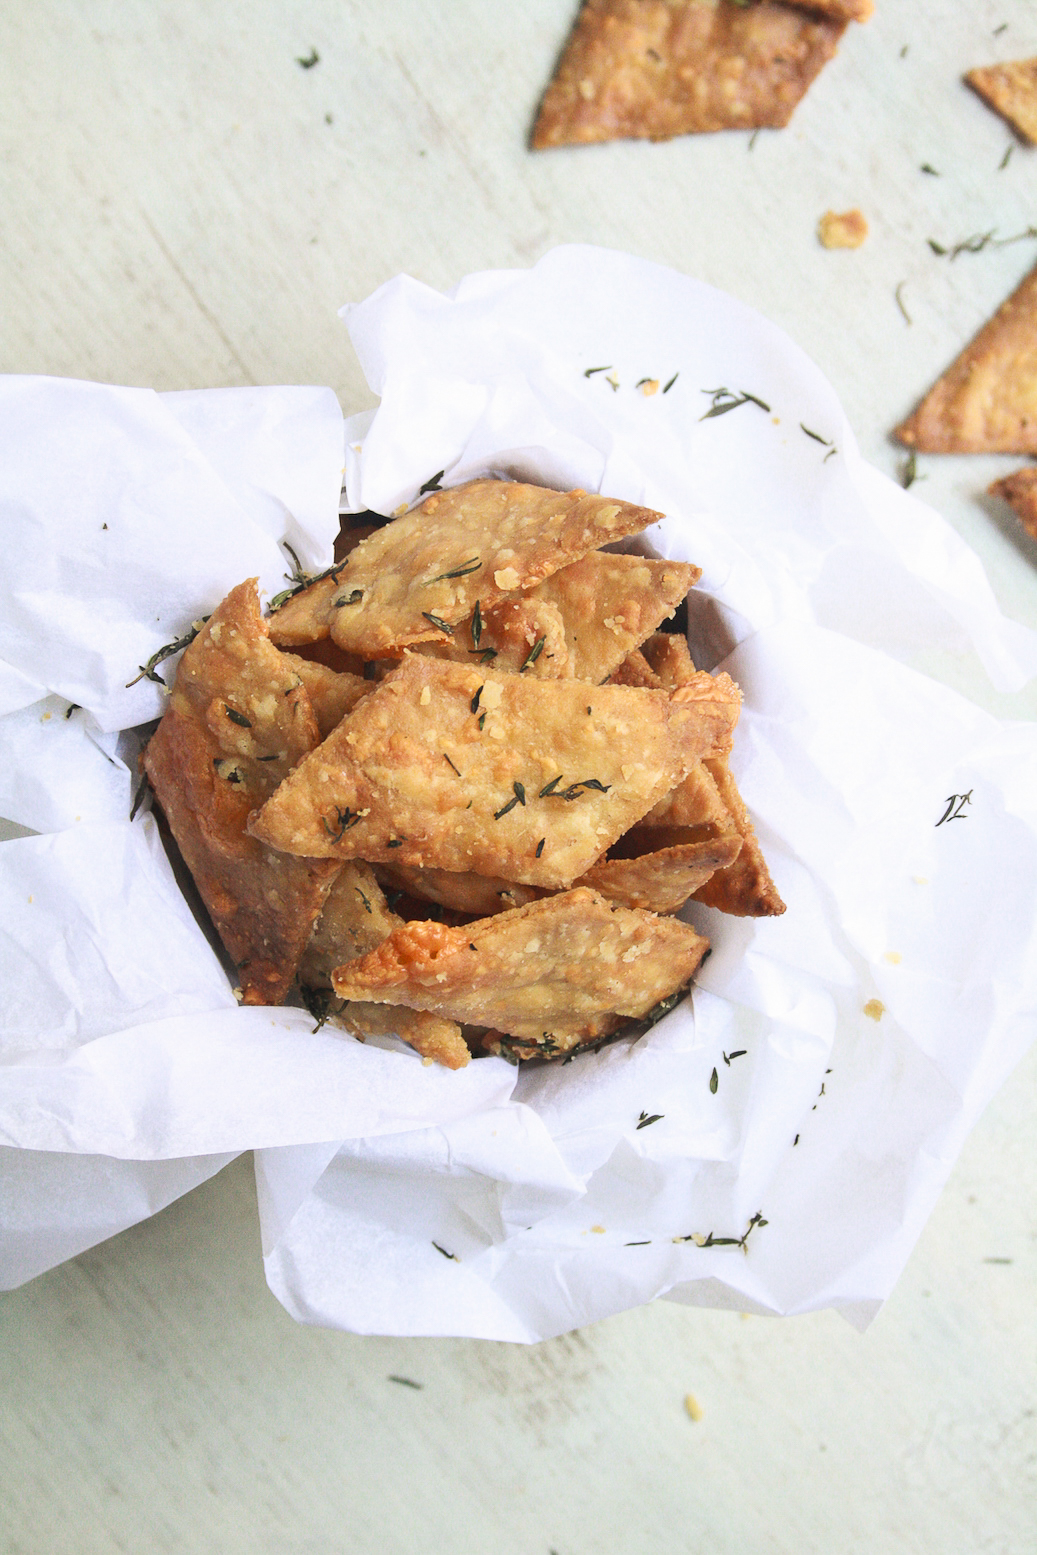 Crispy, baked crackers made with olive oil, wholewheat flour and filled with cheddar cheese and fresh thyme!